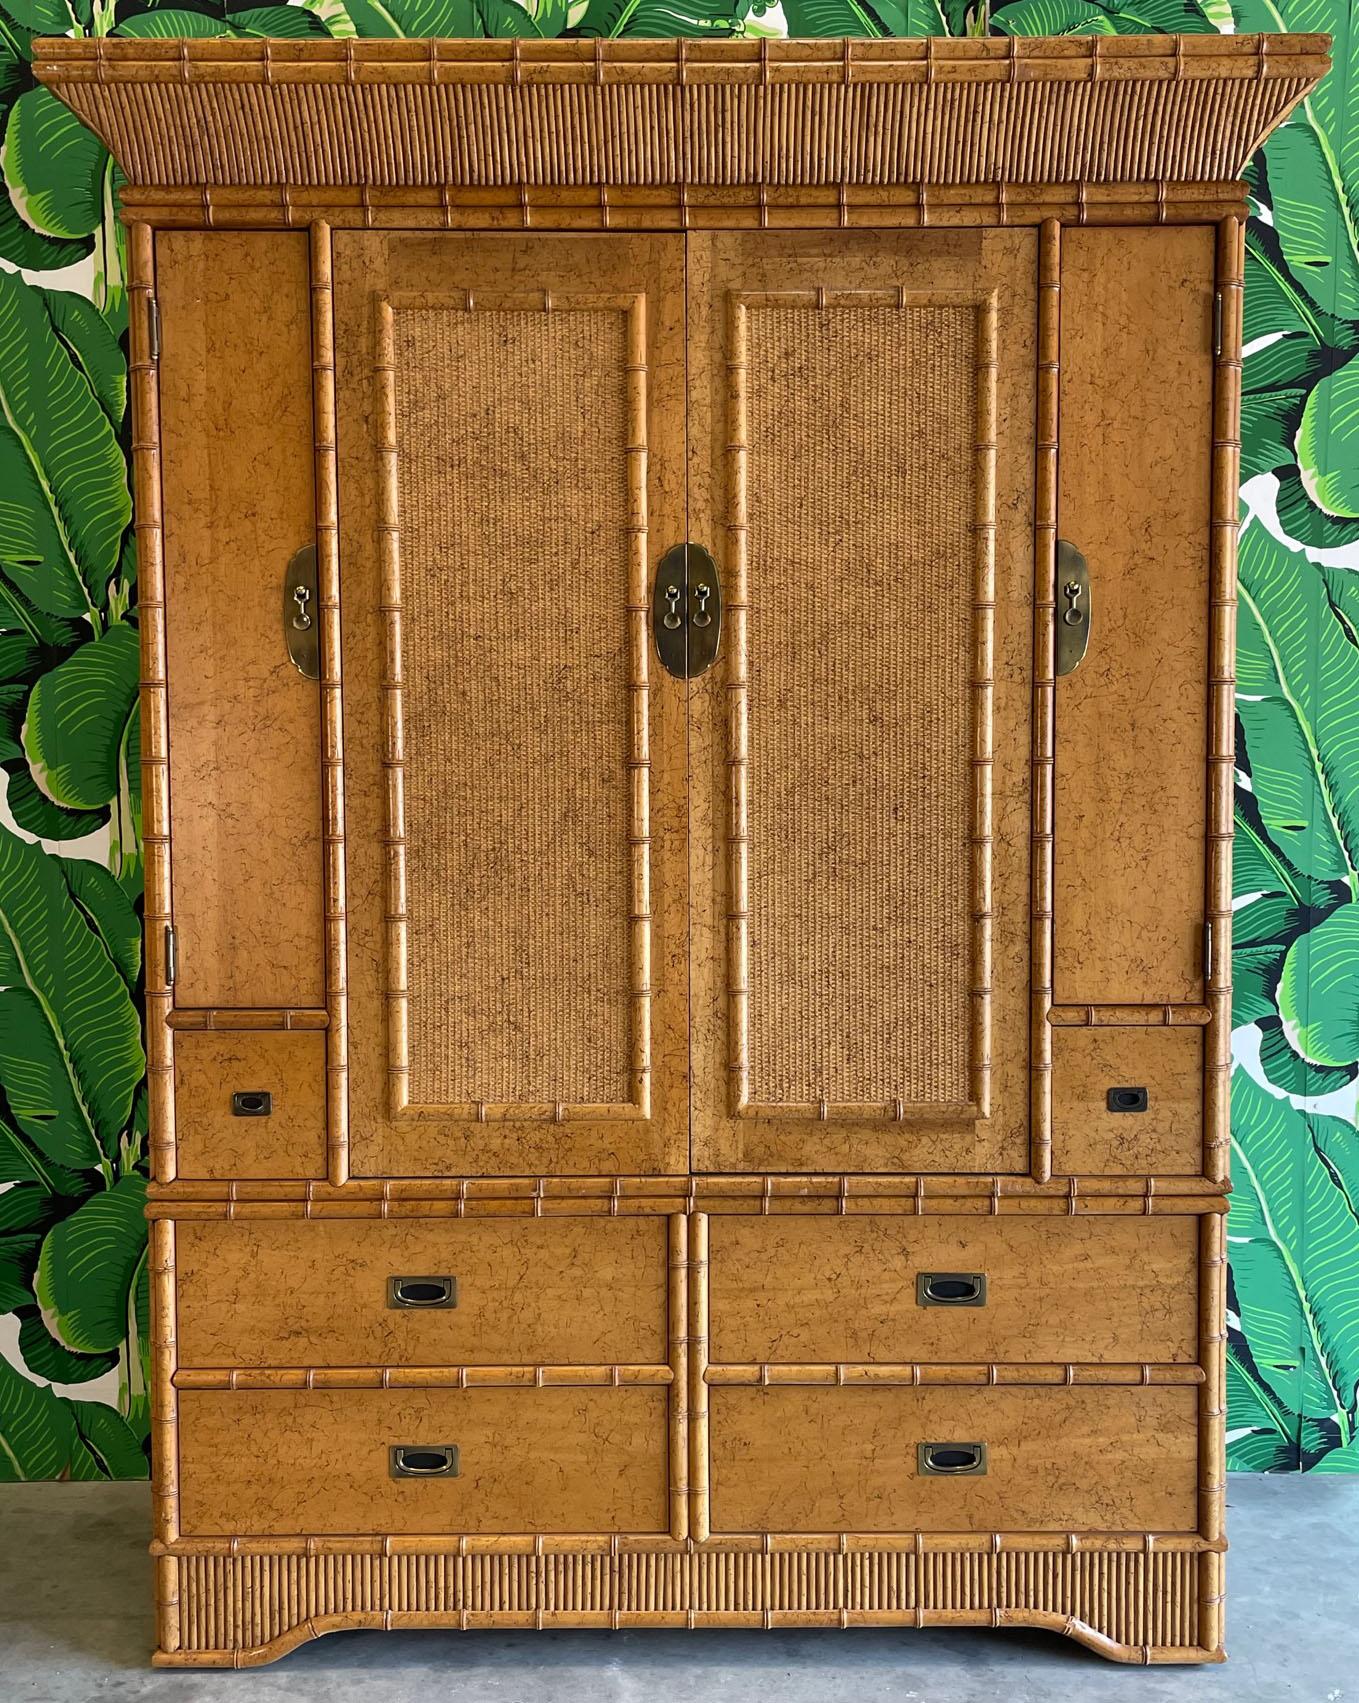 Large scale Asian inspired armoire designed by Miller Yee Fong for Ficks Reed. Features faux bamboo and cane detailing, brass hardware, and ample storage in four large drawers and hidden shelving. Very good condition with minor imperfections